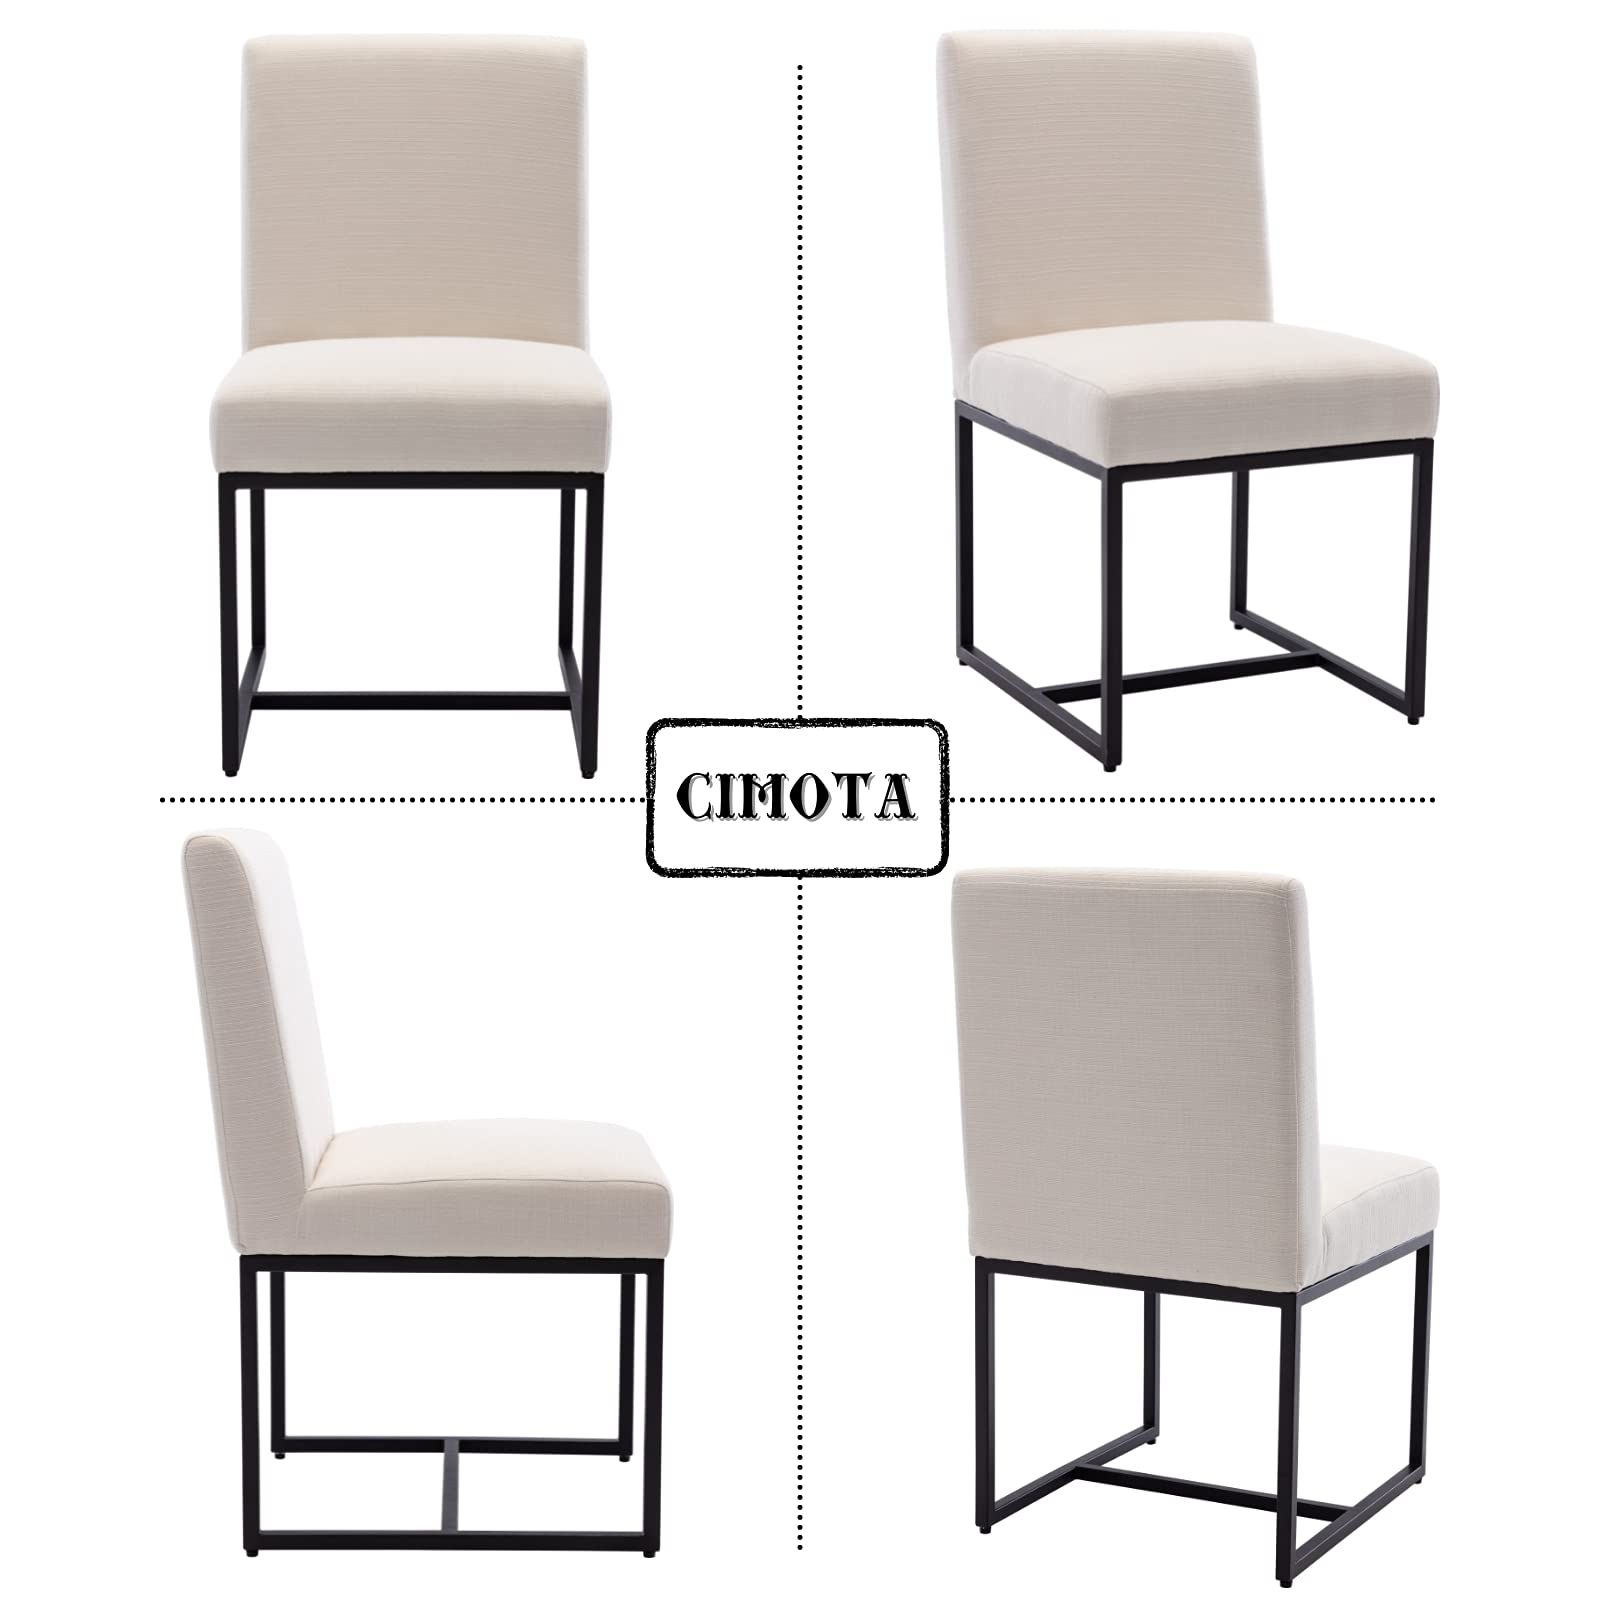 CIMOTA Upholstered Dining Chair, Mid Century Modern Dining Room Chairs Fabric Padded Armless Side Ch | Amazon (US)